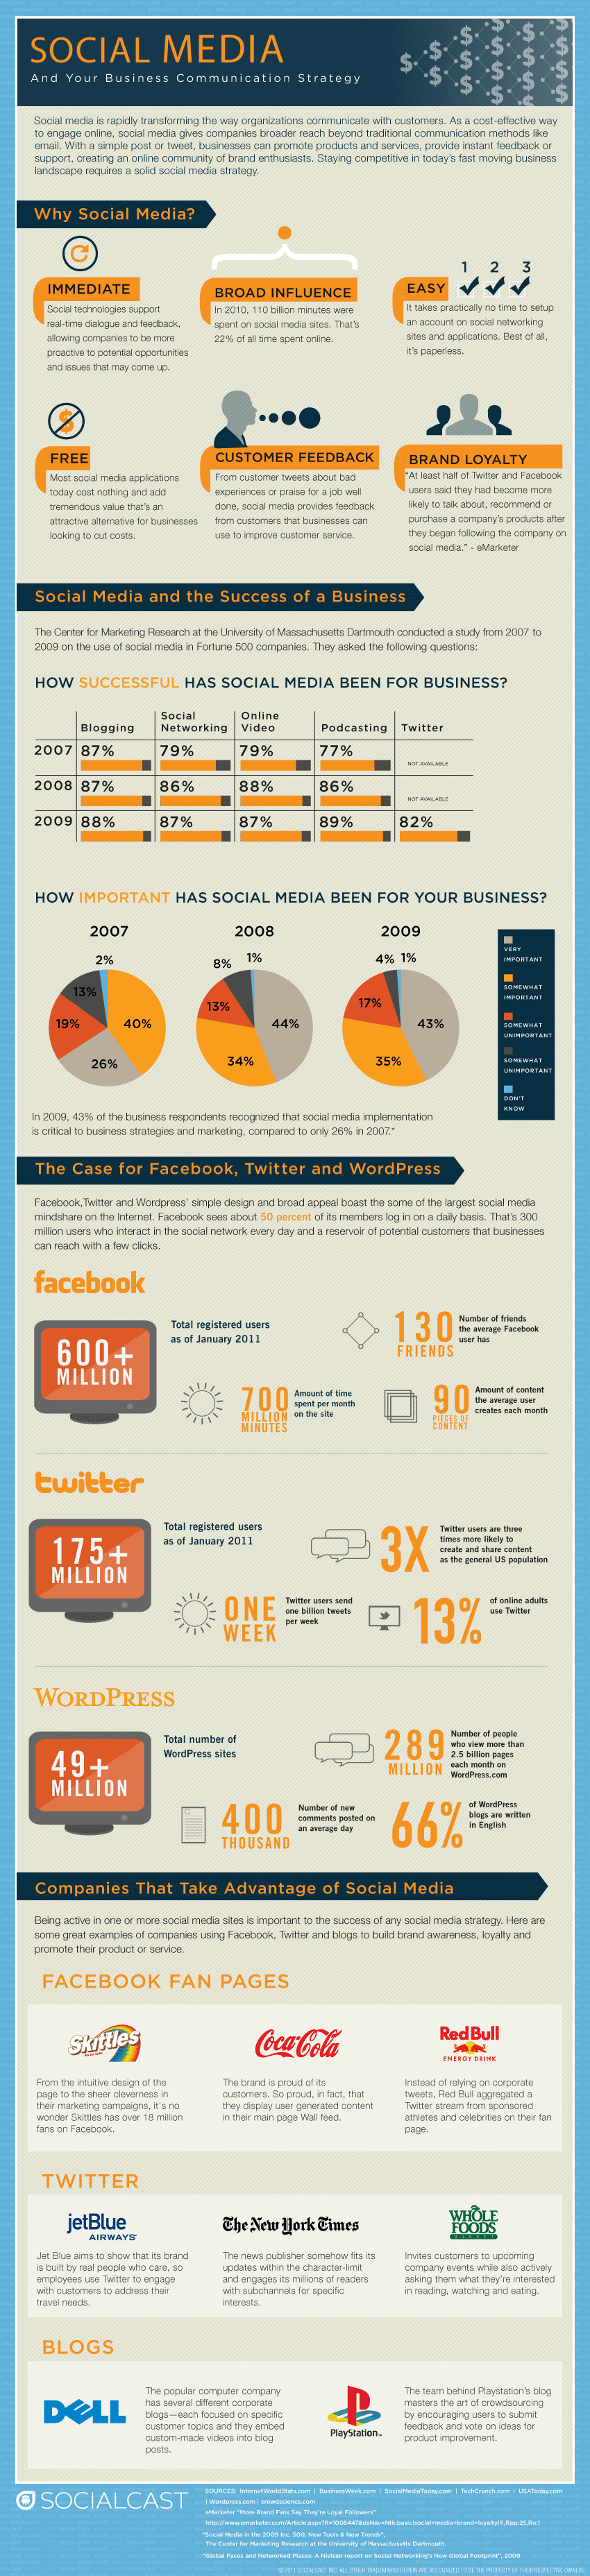 Why Using Social Media In Your Marketing Is Crucial [Infographic]